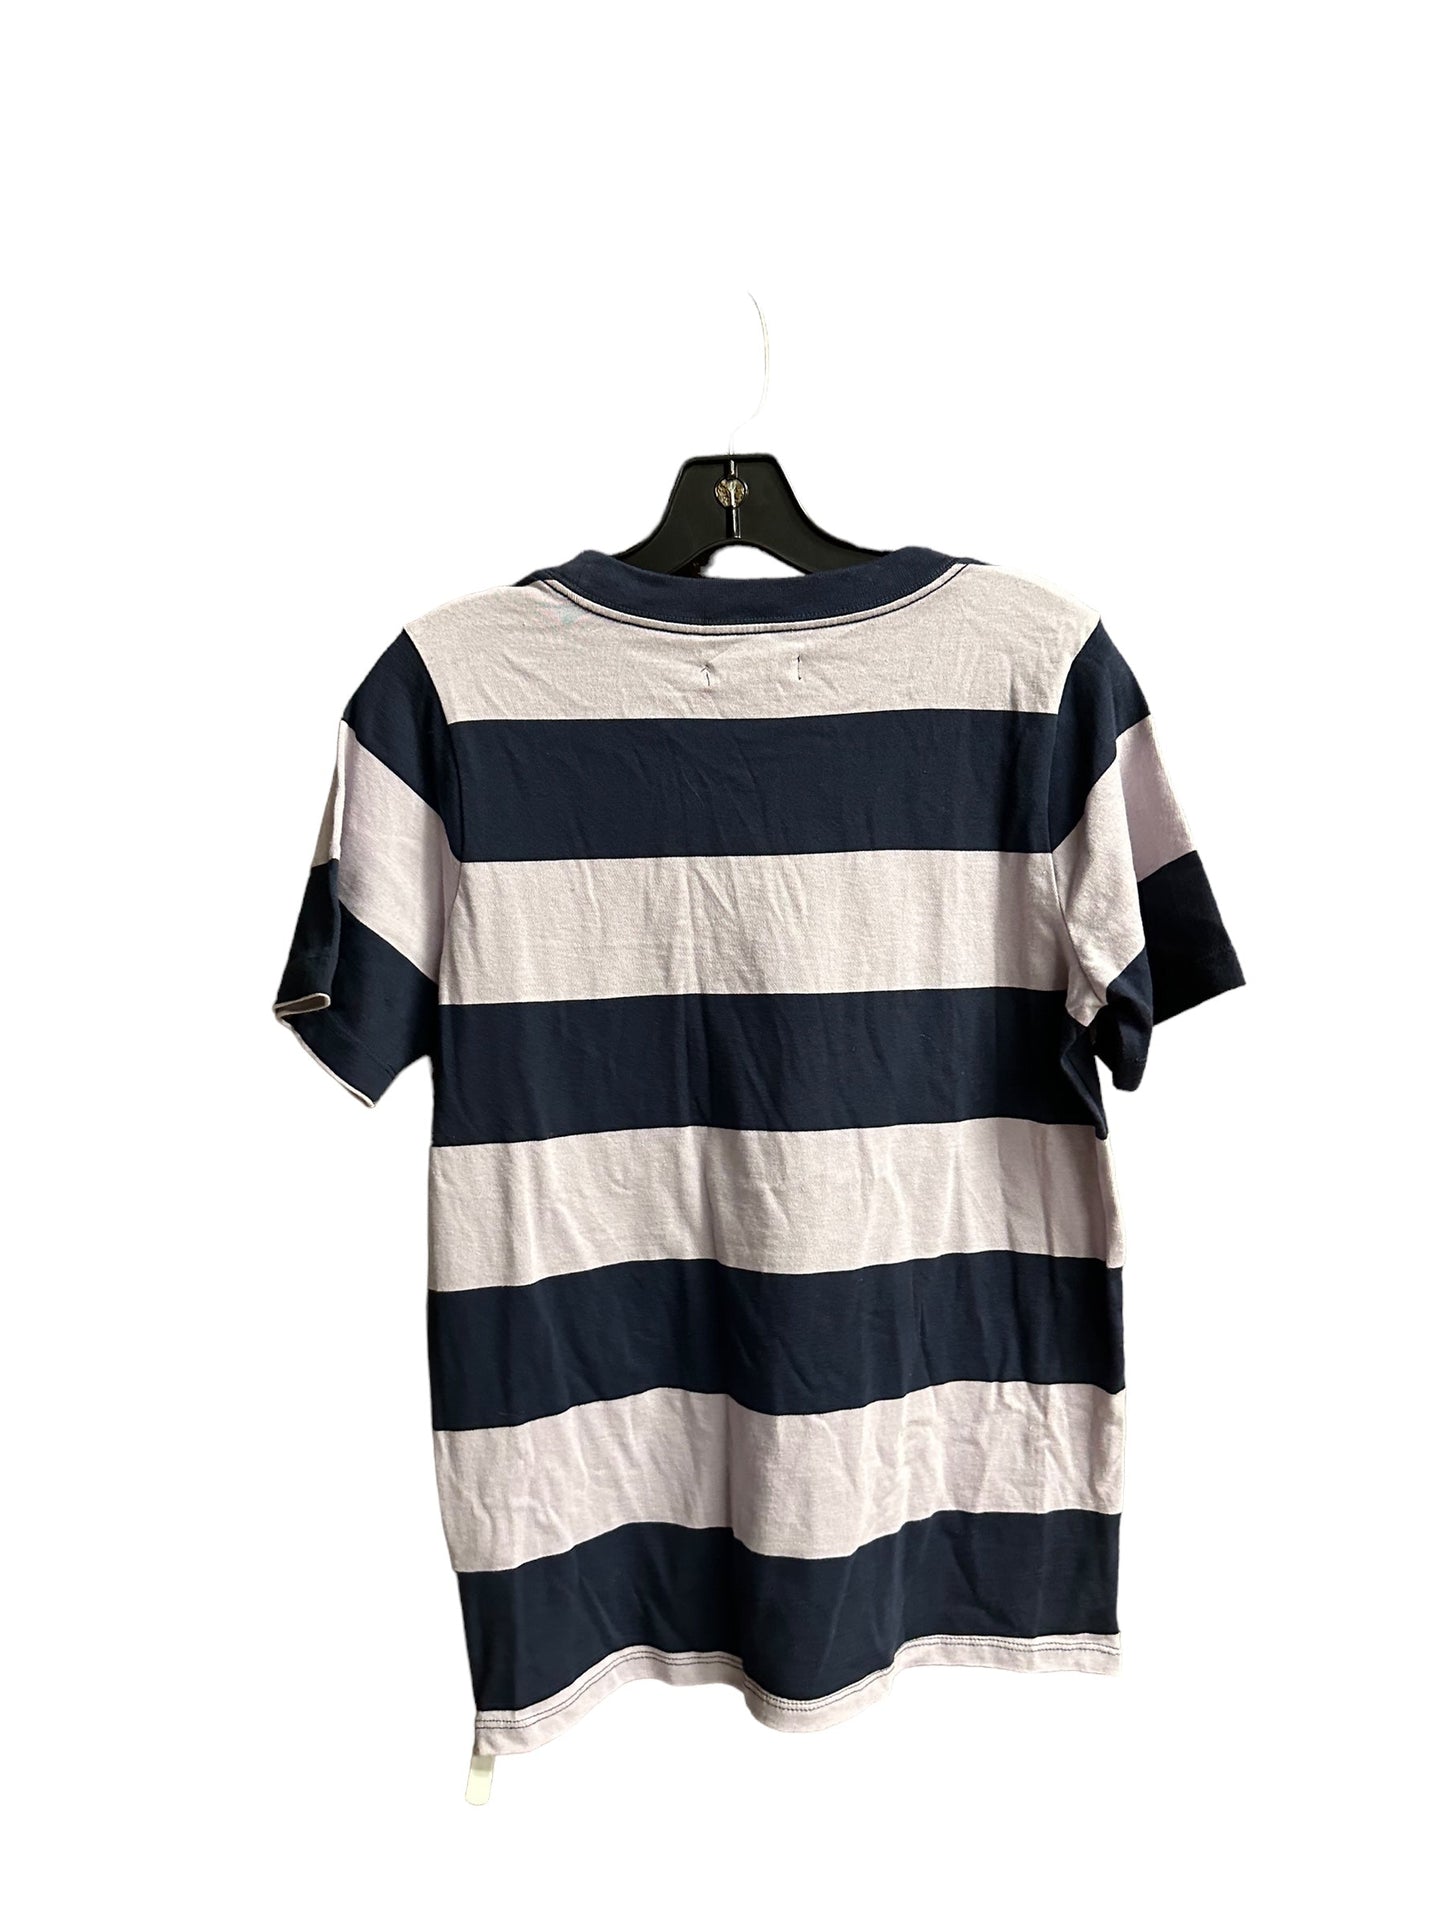 Striped Pattern Top Short Sleeve Madewell, Size S